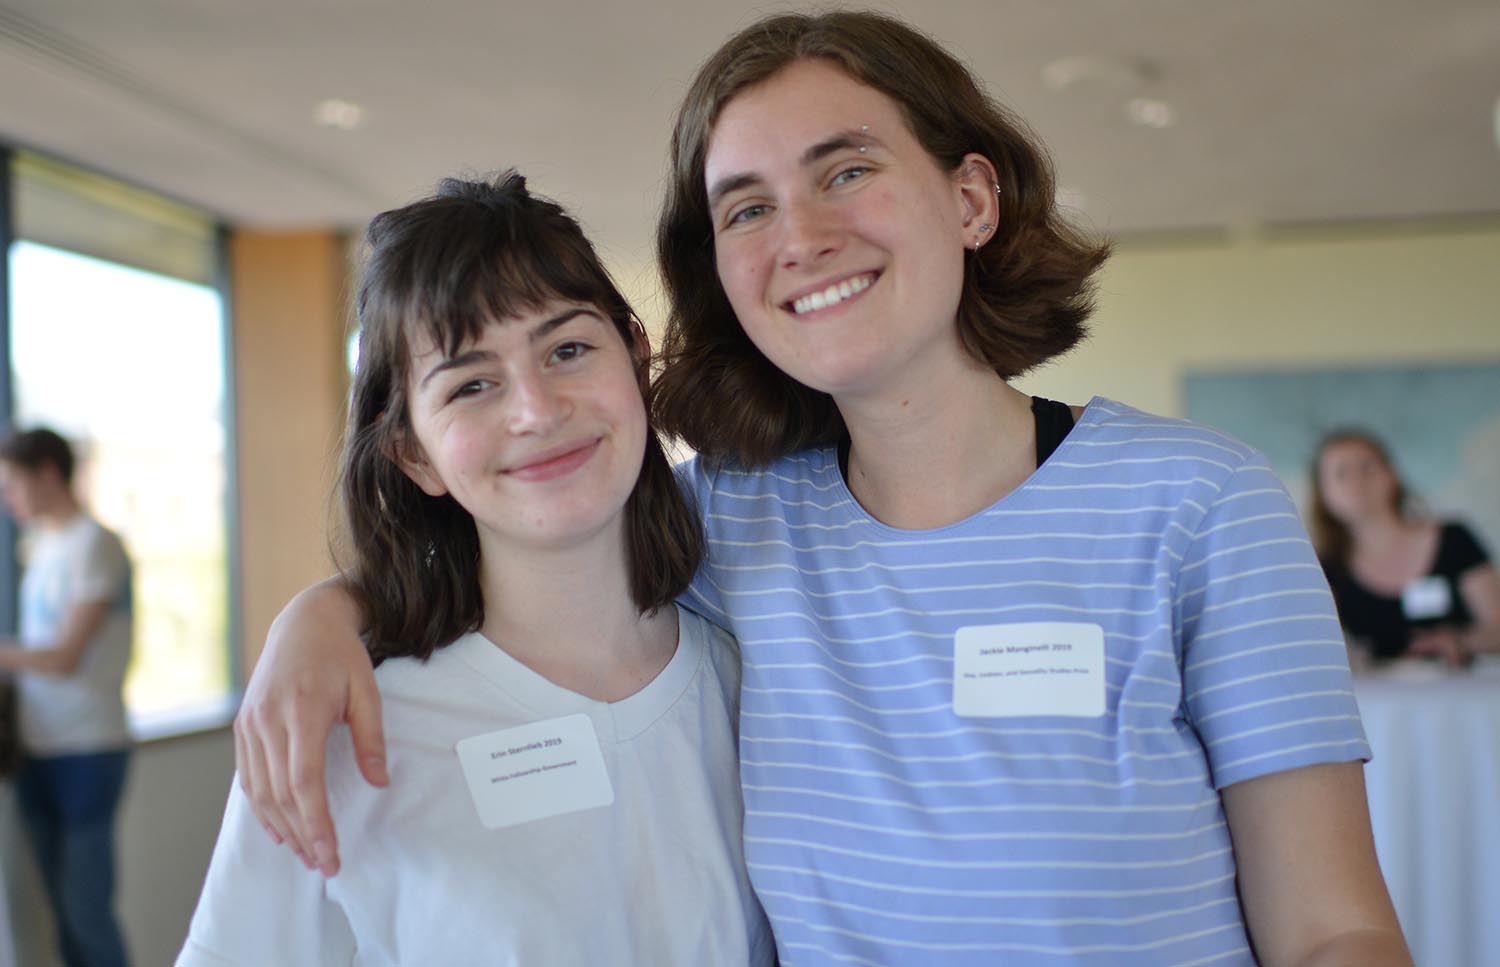 Erin Sternlieb ‘19 received the White Fellowship for Government. Jackie Manginelli ‘19 received the Gay, Lesbian, and Sexuality Studies Prize.Erin Sternlieb ‘19 received the White Fellowship for Government. Jackie Manginelli ‘19 received the Gay, Lesbian, and Sexuality Studies Prize.